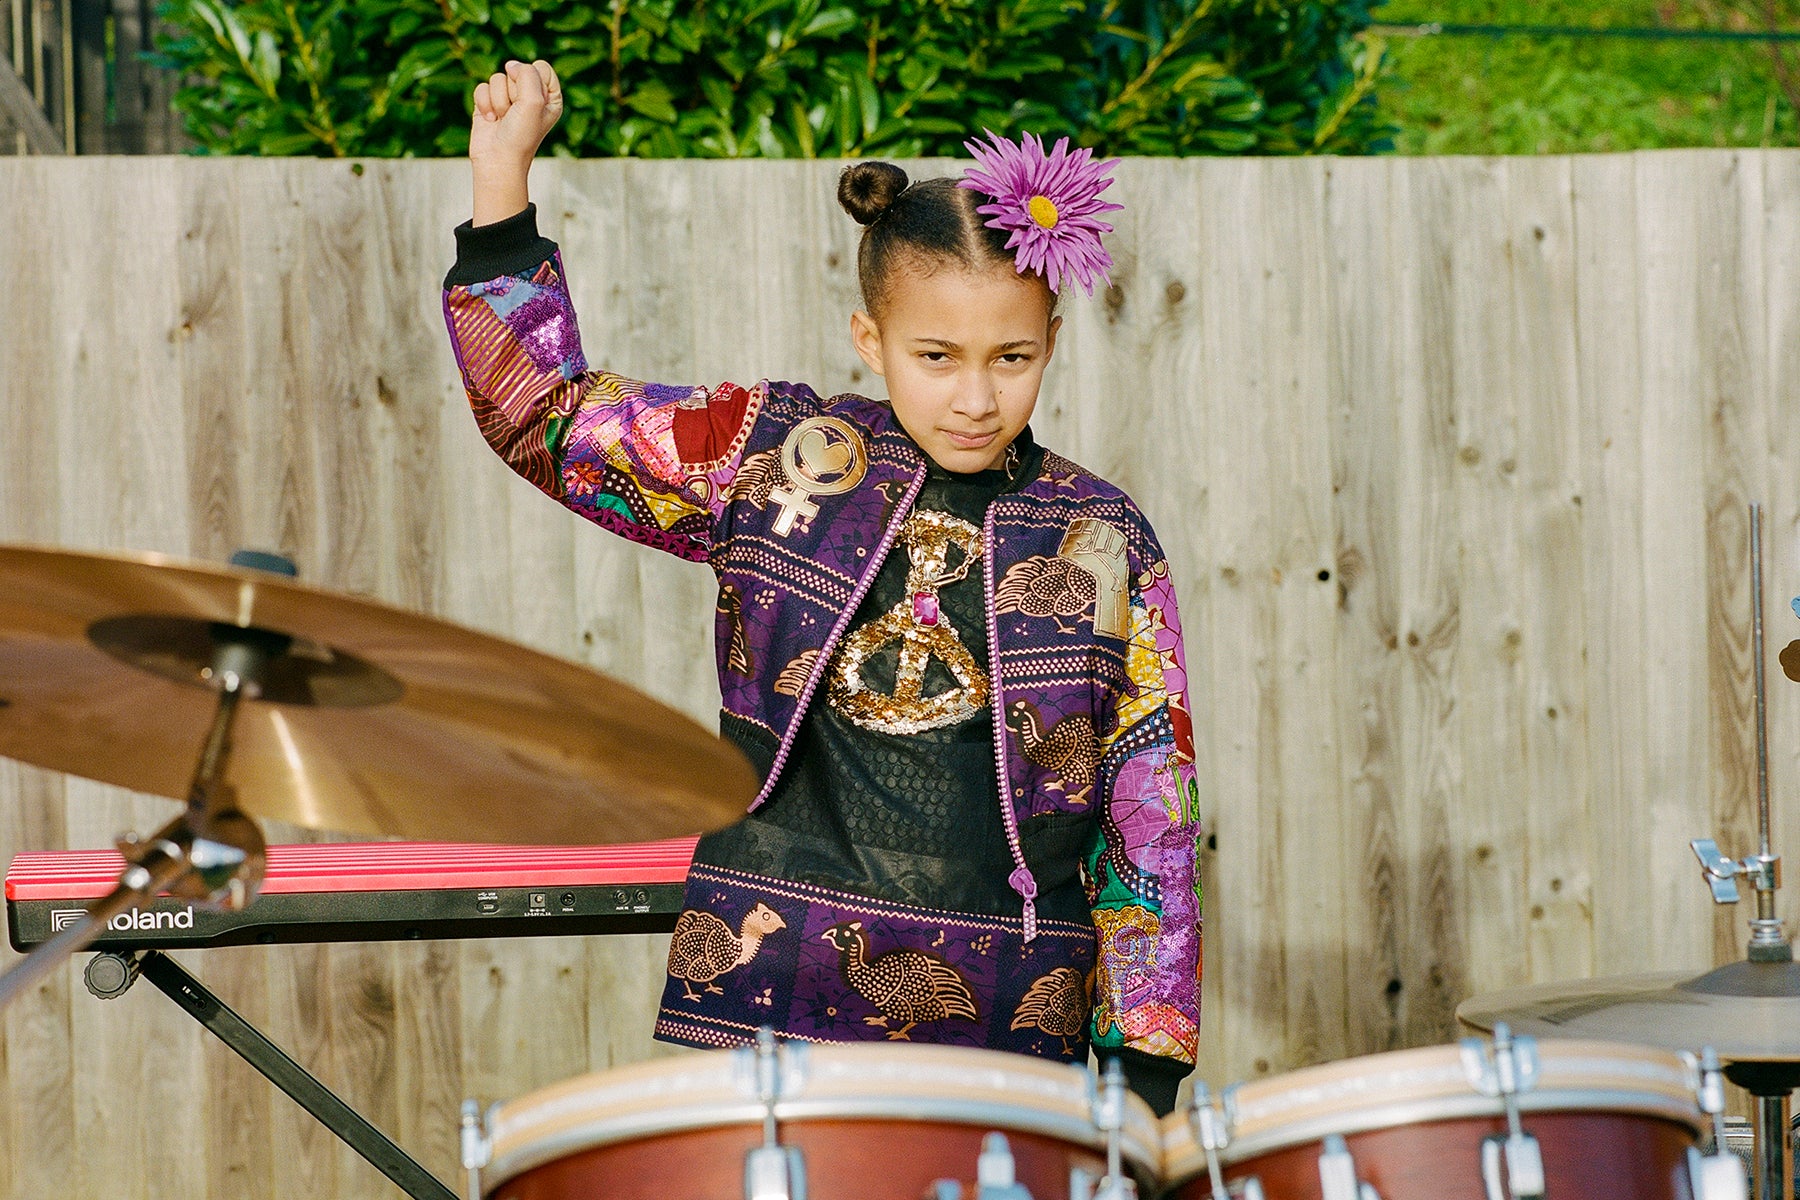 Nandi Bushell Pays Tribute To Neil Peart With 'Tom Sawyer' Drum Cover